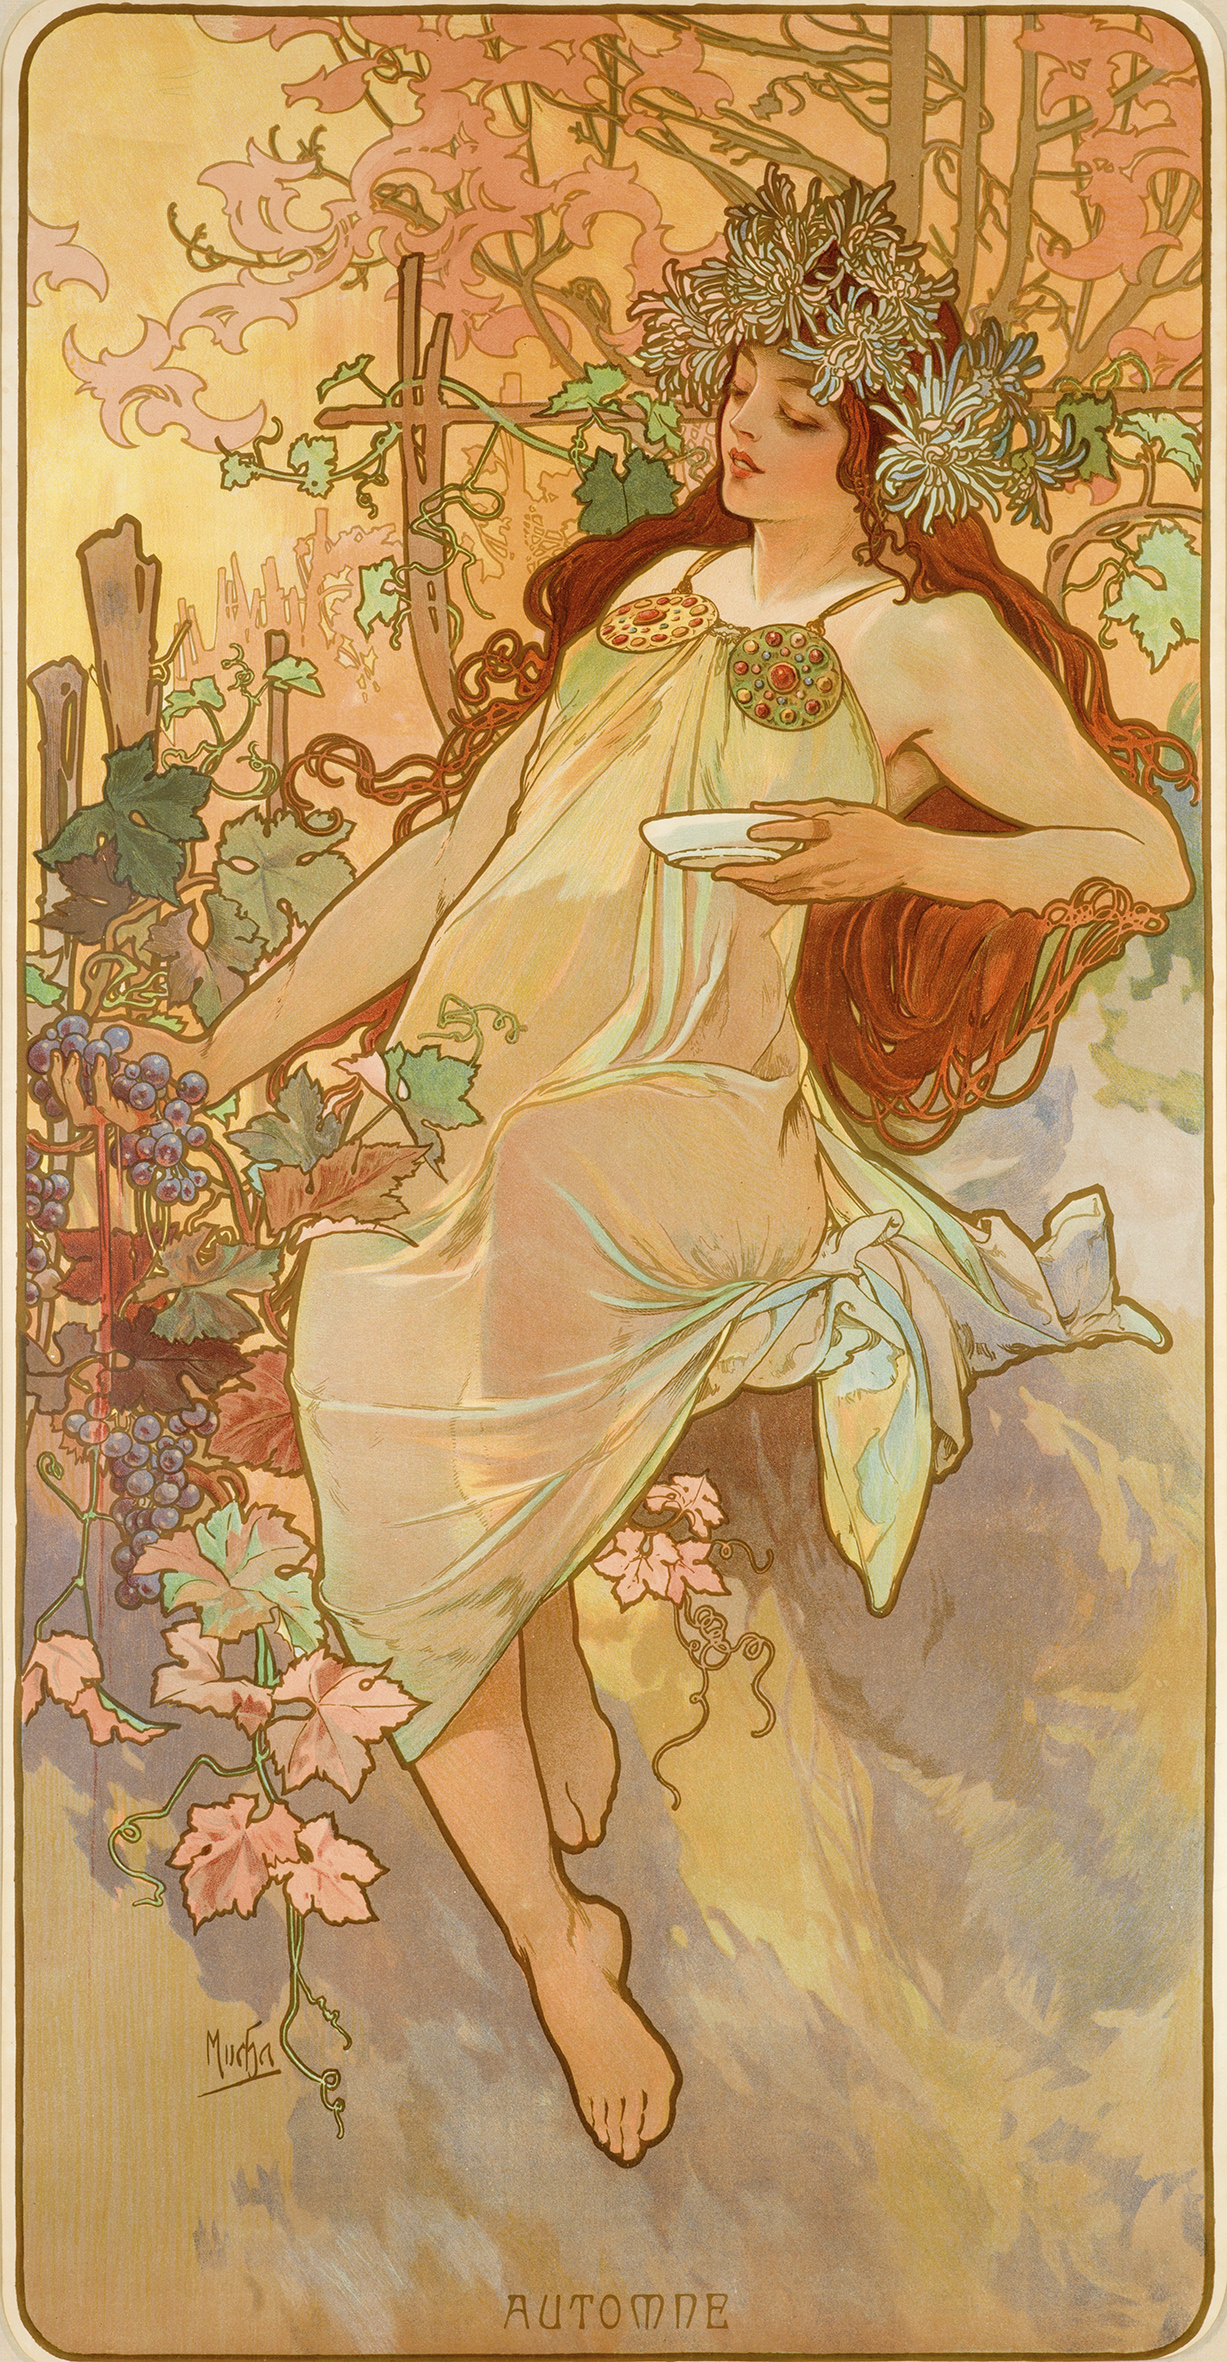 illustrational poster of a woman holding a dish sitting amongst flowers